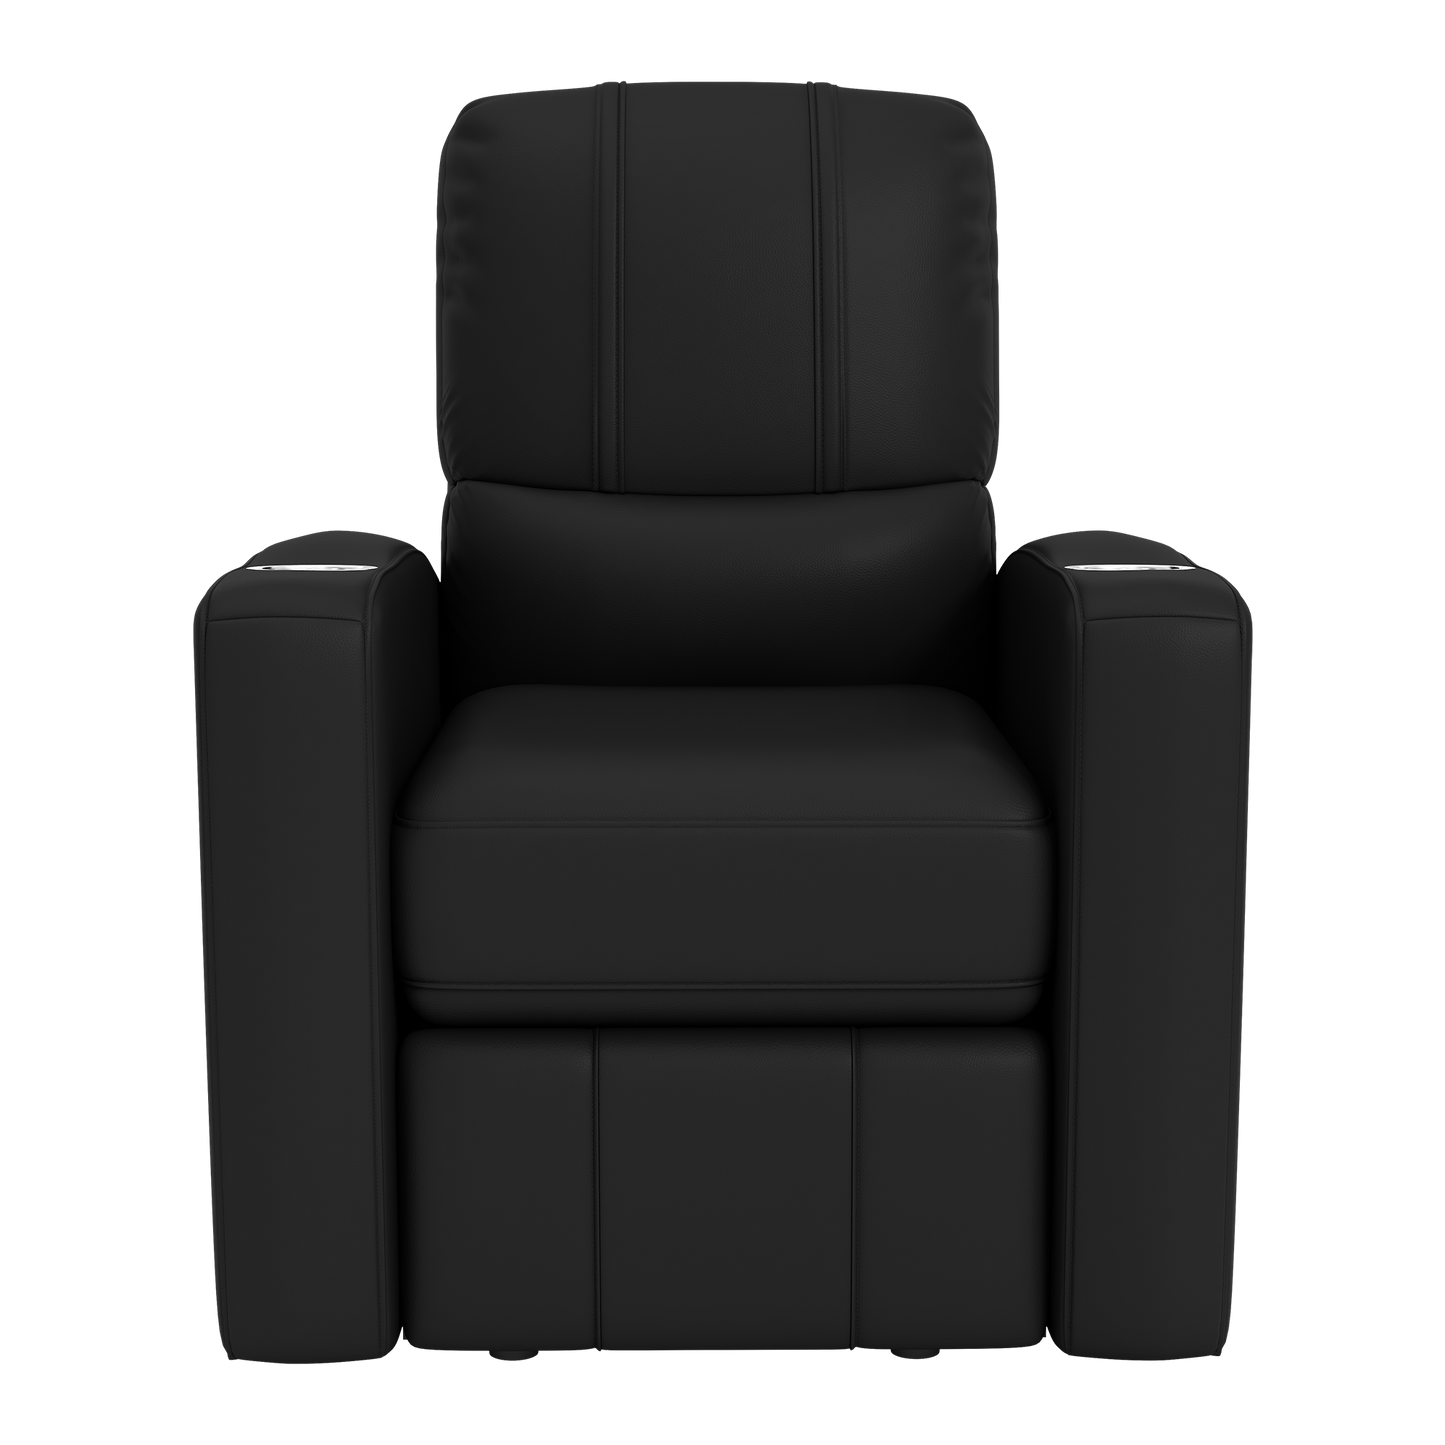 Stealth Recliner with Seattle Mariners Secondary